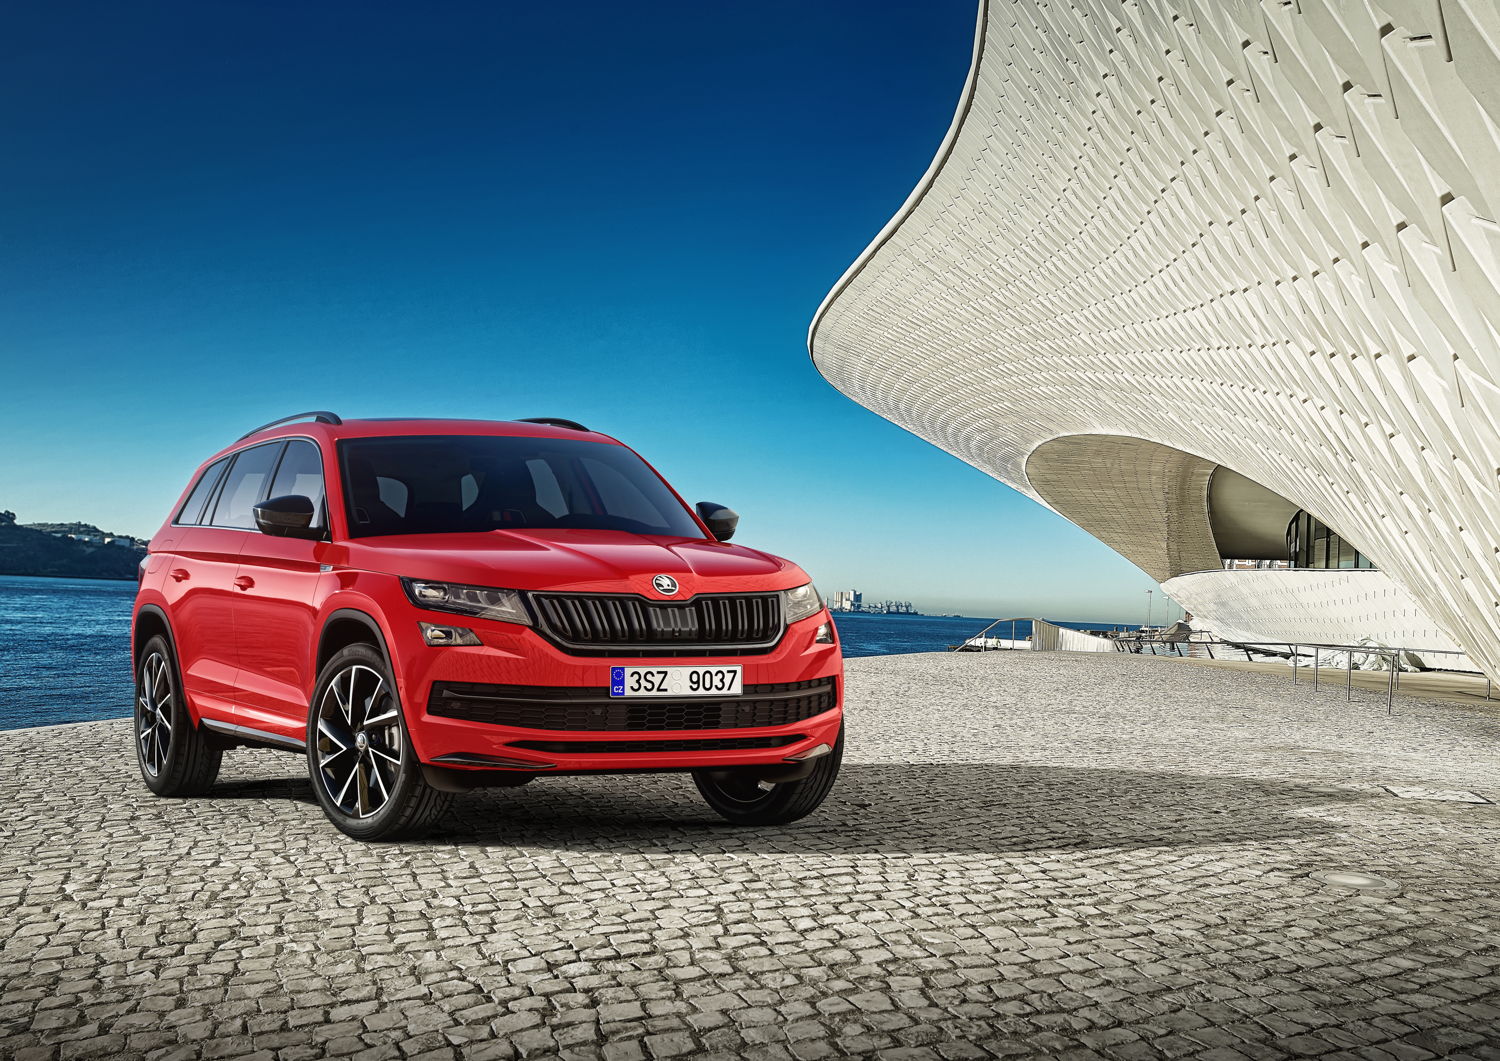 With the ŠKODA KODIAQ SPORTLINE, the Czech car manufacturer will present an elegant, dynamic variant of its new large SUV.